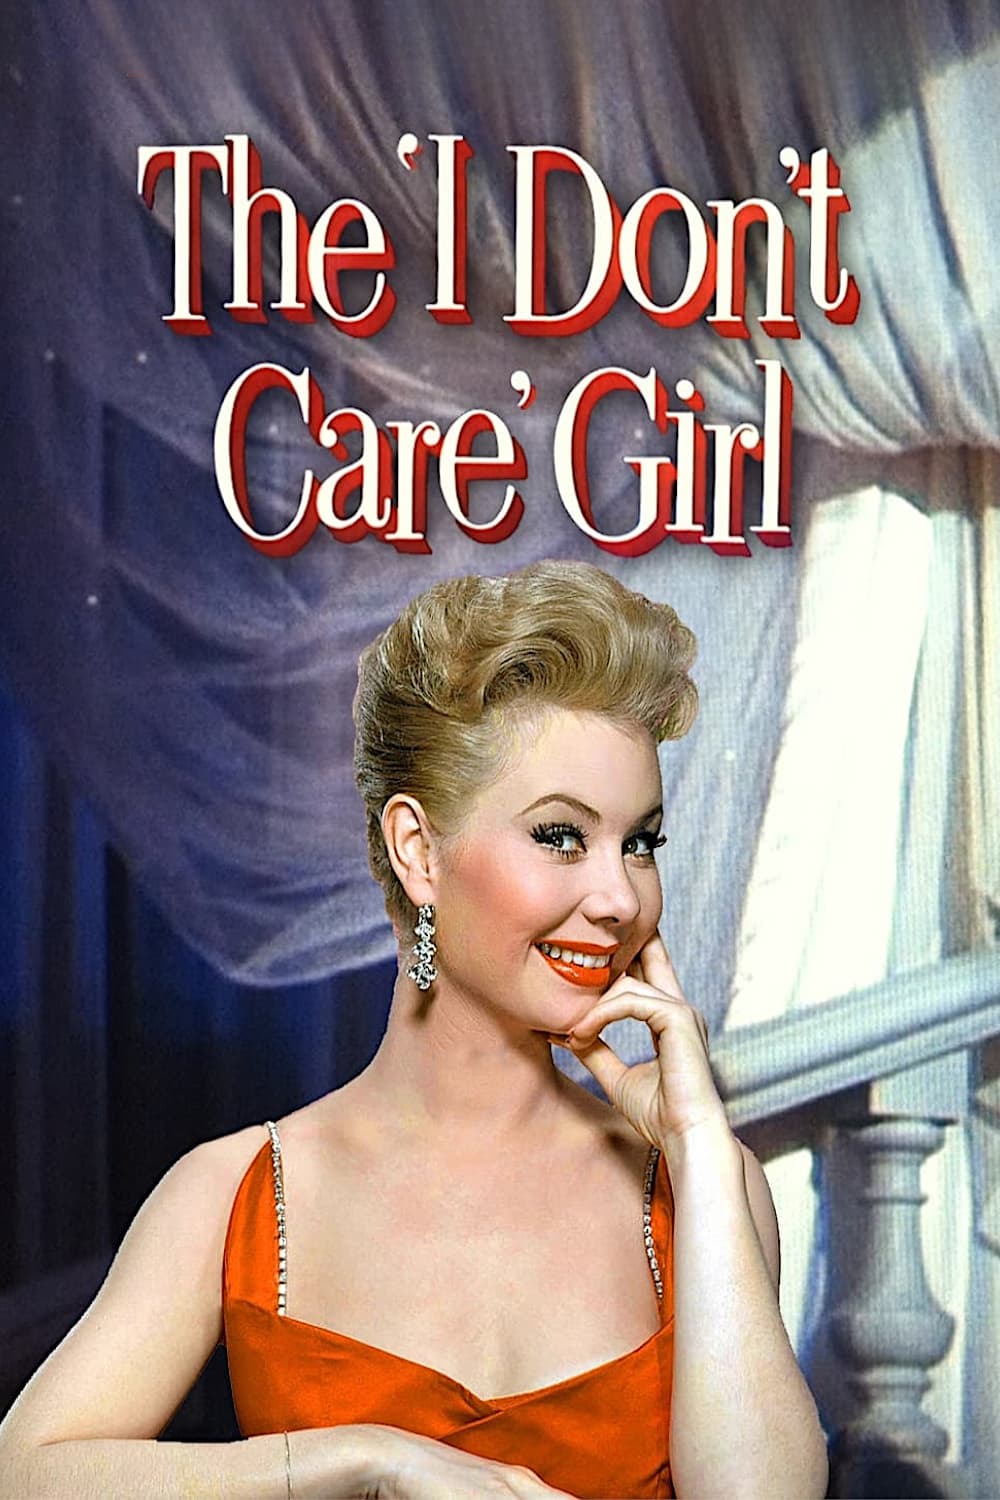 The I Don't Care Girl (1953)